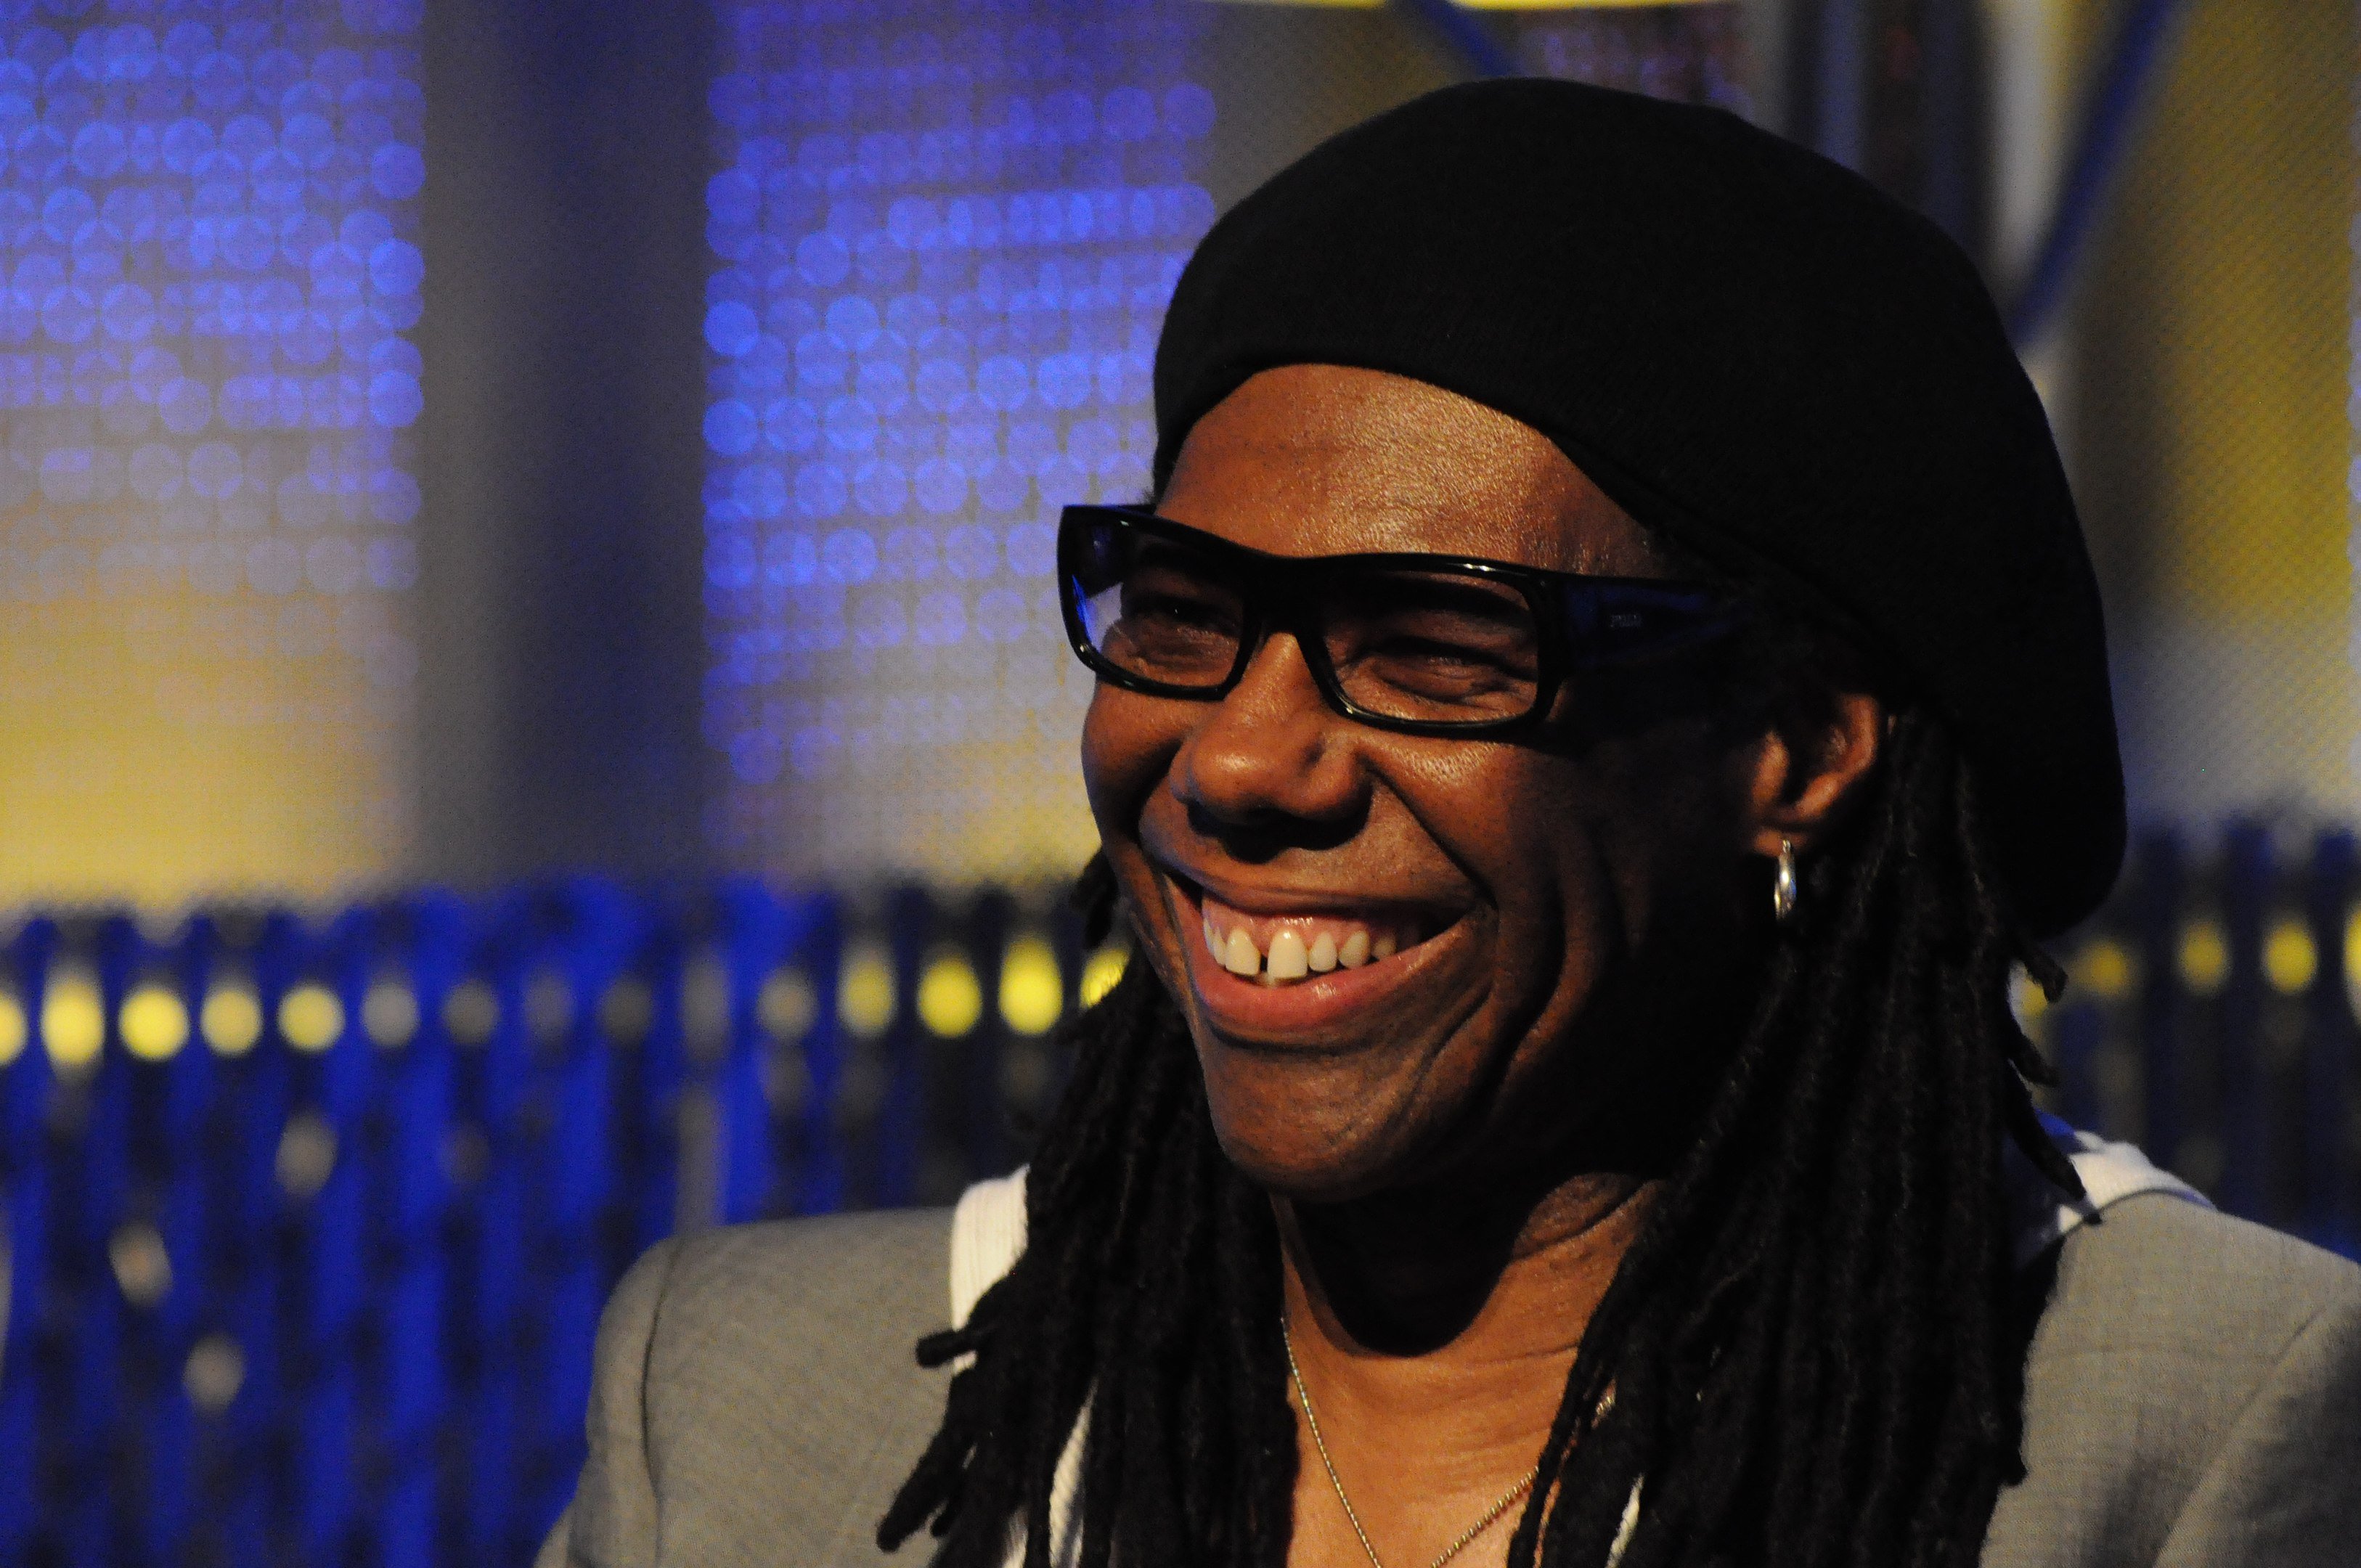 Nile Rodgers on the keynote panel of the 2010 Pop Conference, EMPSFM, Seattle, Washington. | Photo By Joe Mabel, CC BY-SA 3.0, Wikimedia Commons Images